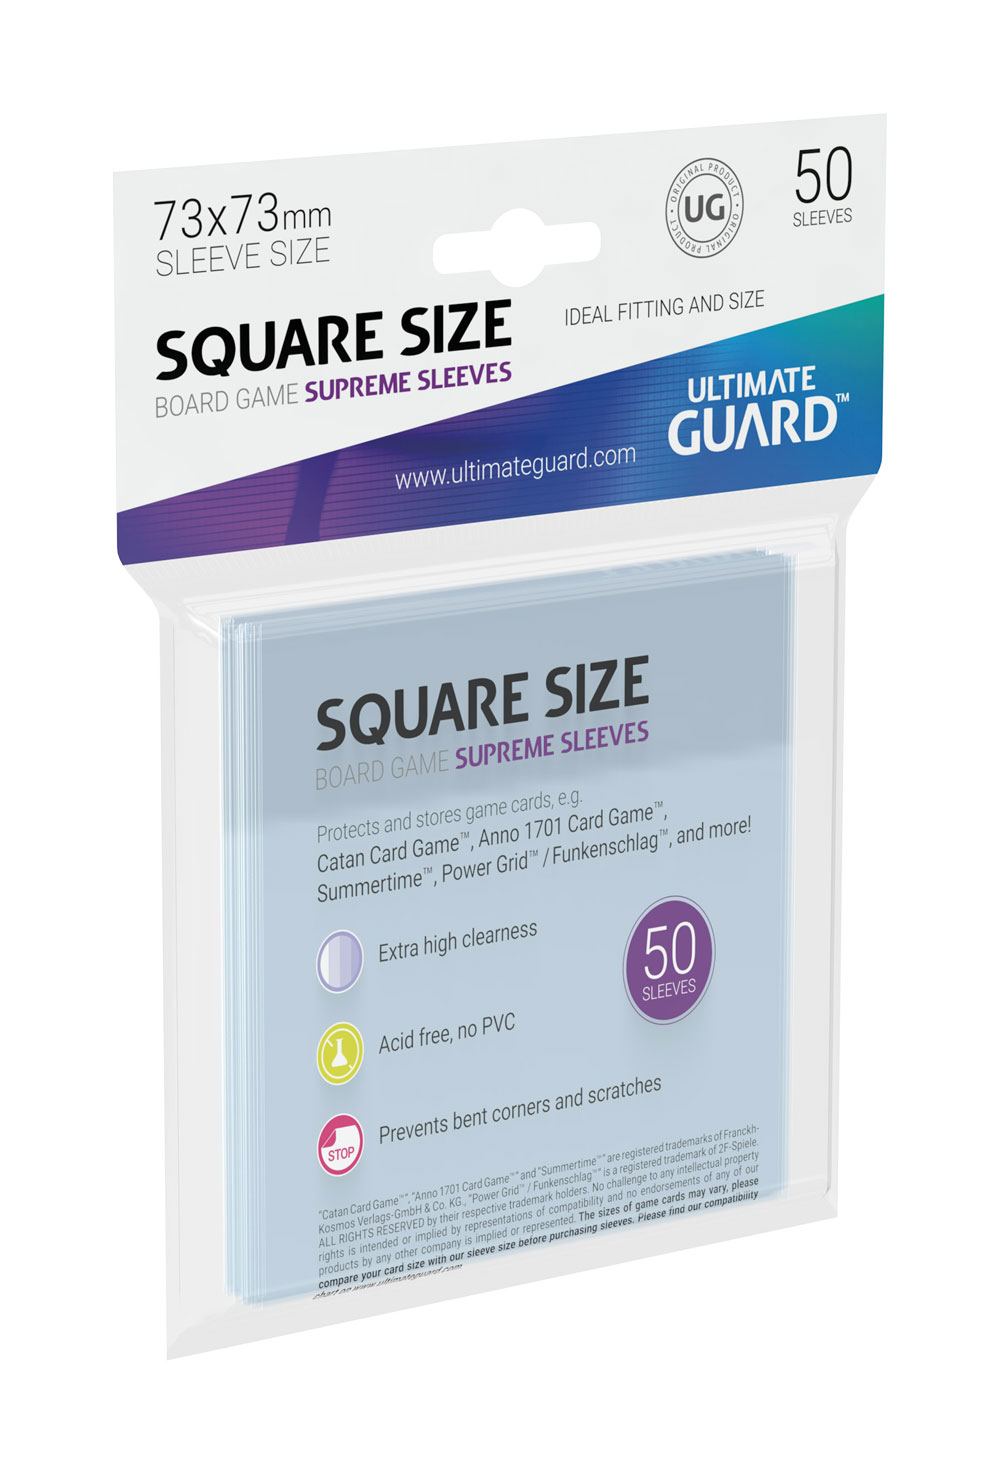 Ultimate Guard Premium Square Soft Sleeves for Board Games (50 Sleeves)